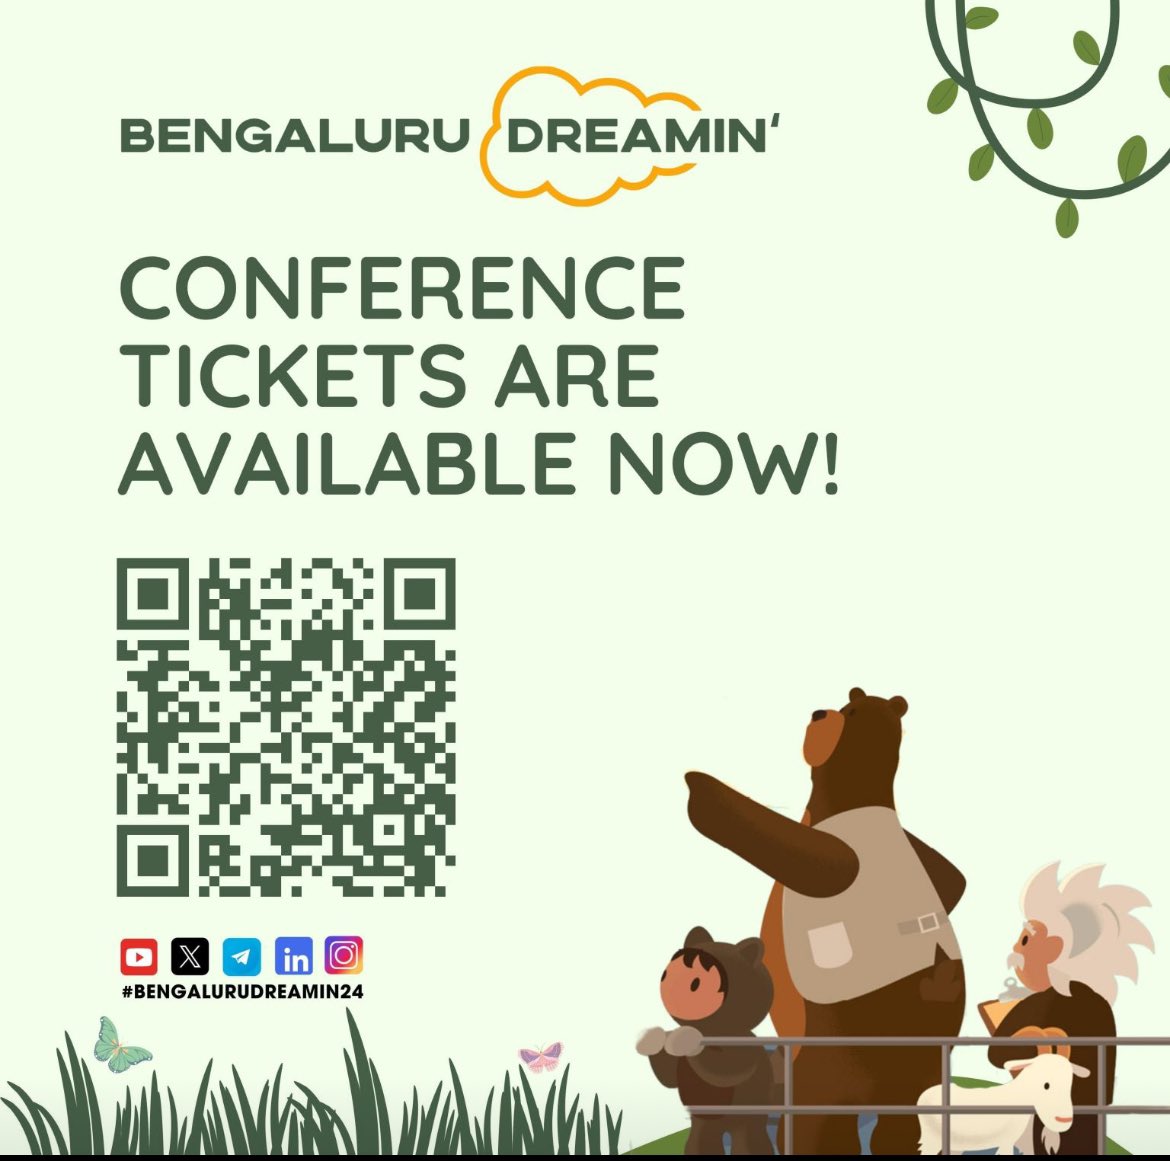 Hello #trailblazers Registrations for the Bengaluru Dreamin' conference are now Live. 𝗖𝗵𝗲𝗰𝗸 𝗼𝘂𝘁 𝘁𝗵𝗲 𝗿𝗲𝗴𝗶𝘀𝘁𝗿𝗮𝘁𝗶𝗼𝗻 𝗹𝗶𝗻𝗸 𝗯𝗲𝗹𝗼𝘄 👇 lnkd.in/gXqT-Me8 More details👇 linkedin.com/posts/bengalur… #BengaluruDreamin24 #Salesforce #Conference